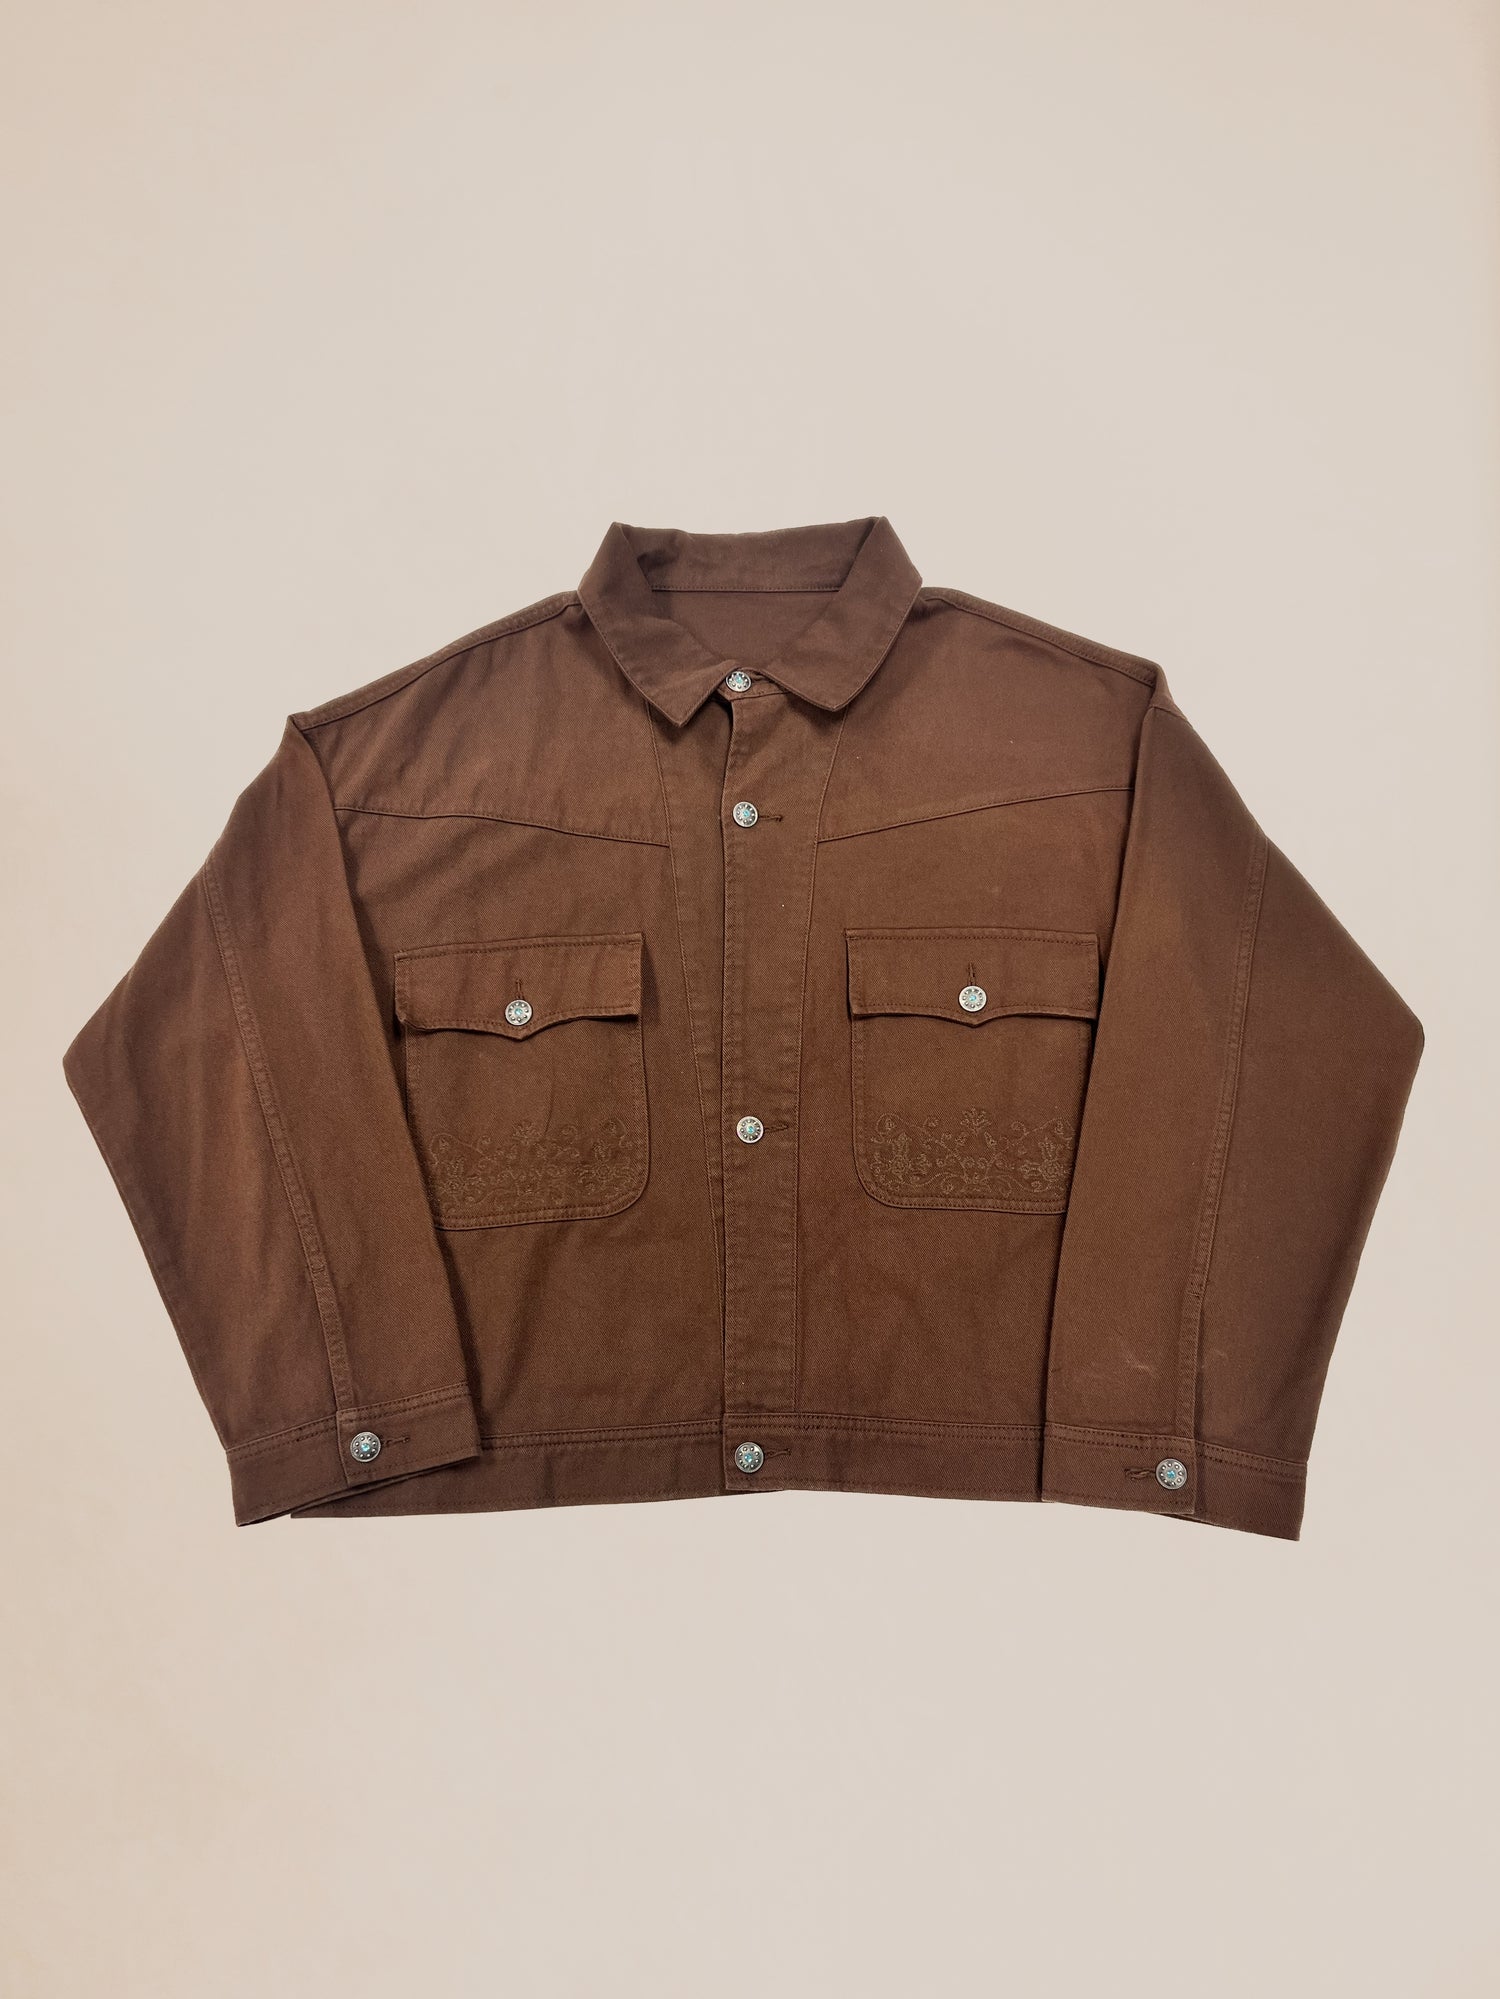 Brown cotton button-up Profound Sample 19 (Western Canvas Jacket) with chest pockets laid flat on a light background.